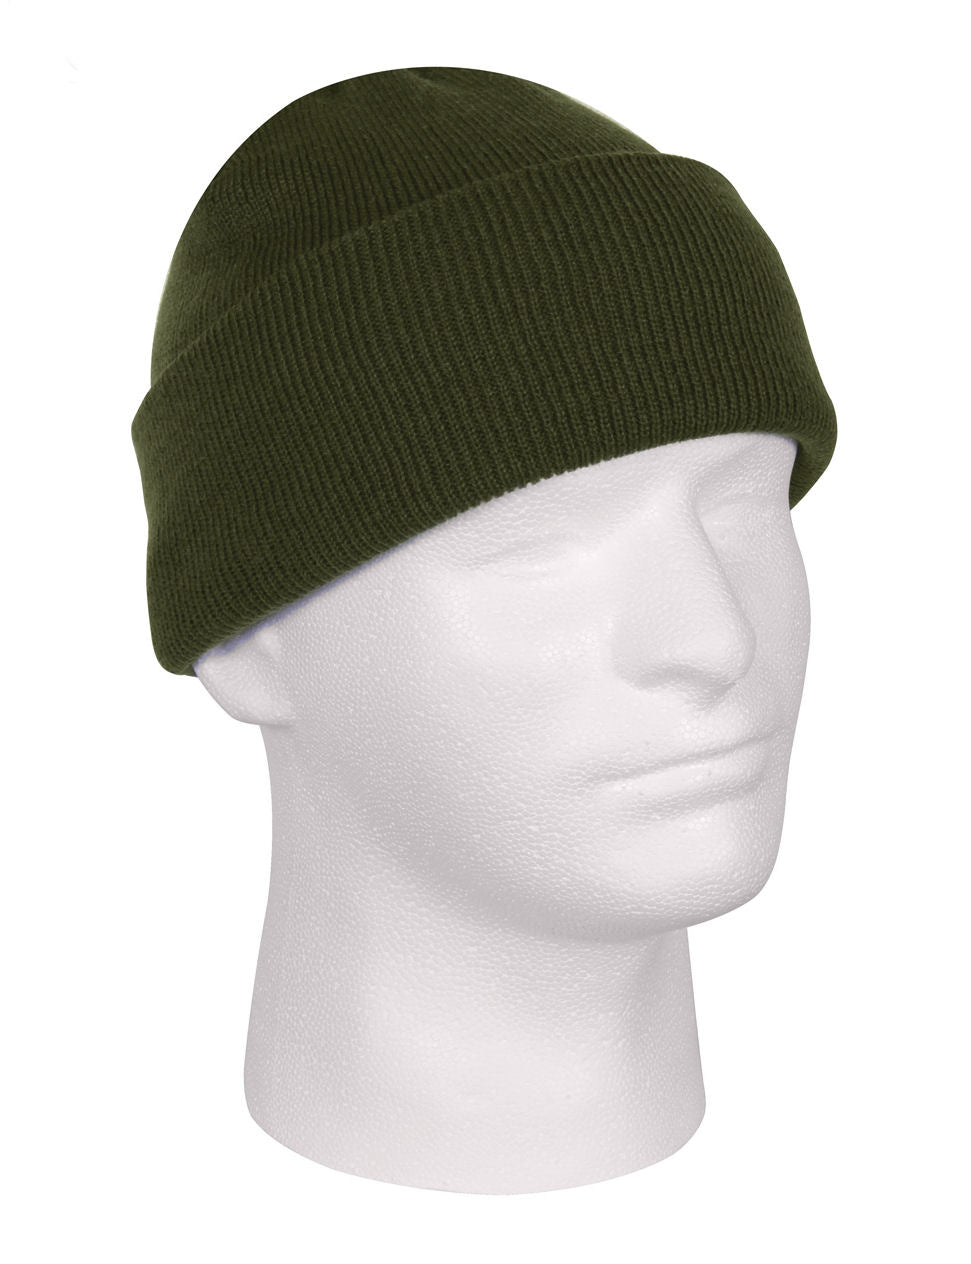 Rothco Deluxe Fine Knit Watch Cap - Various Colors